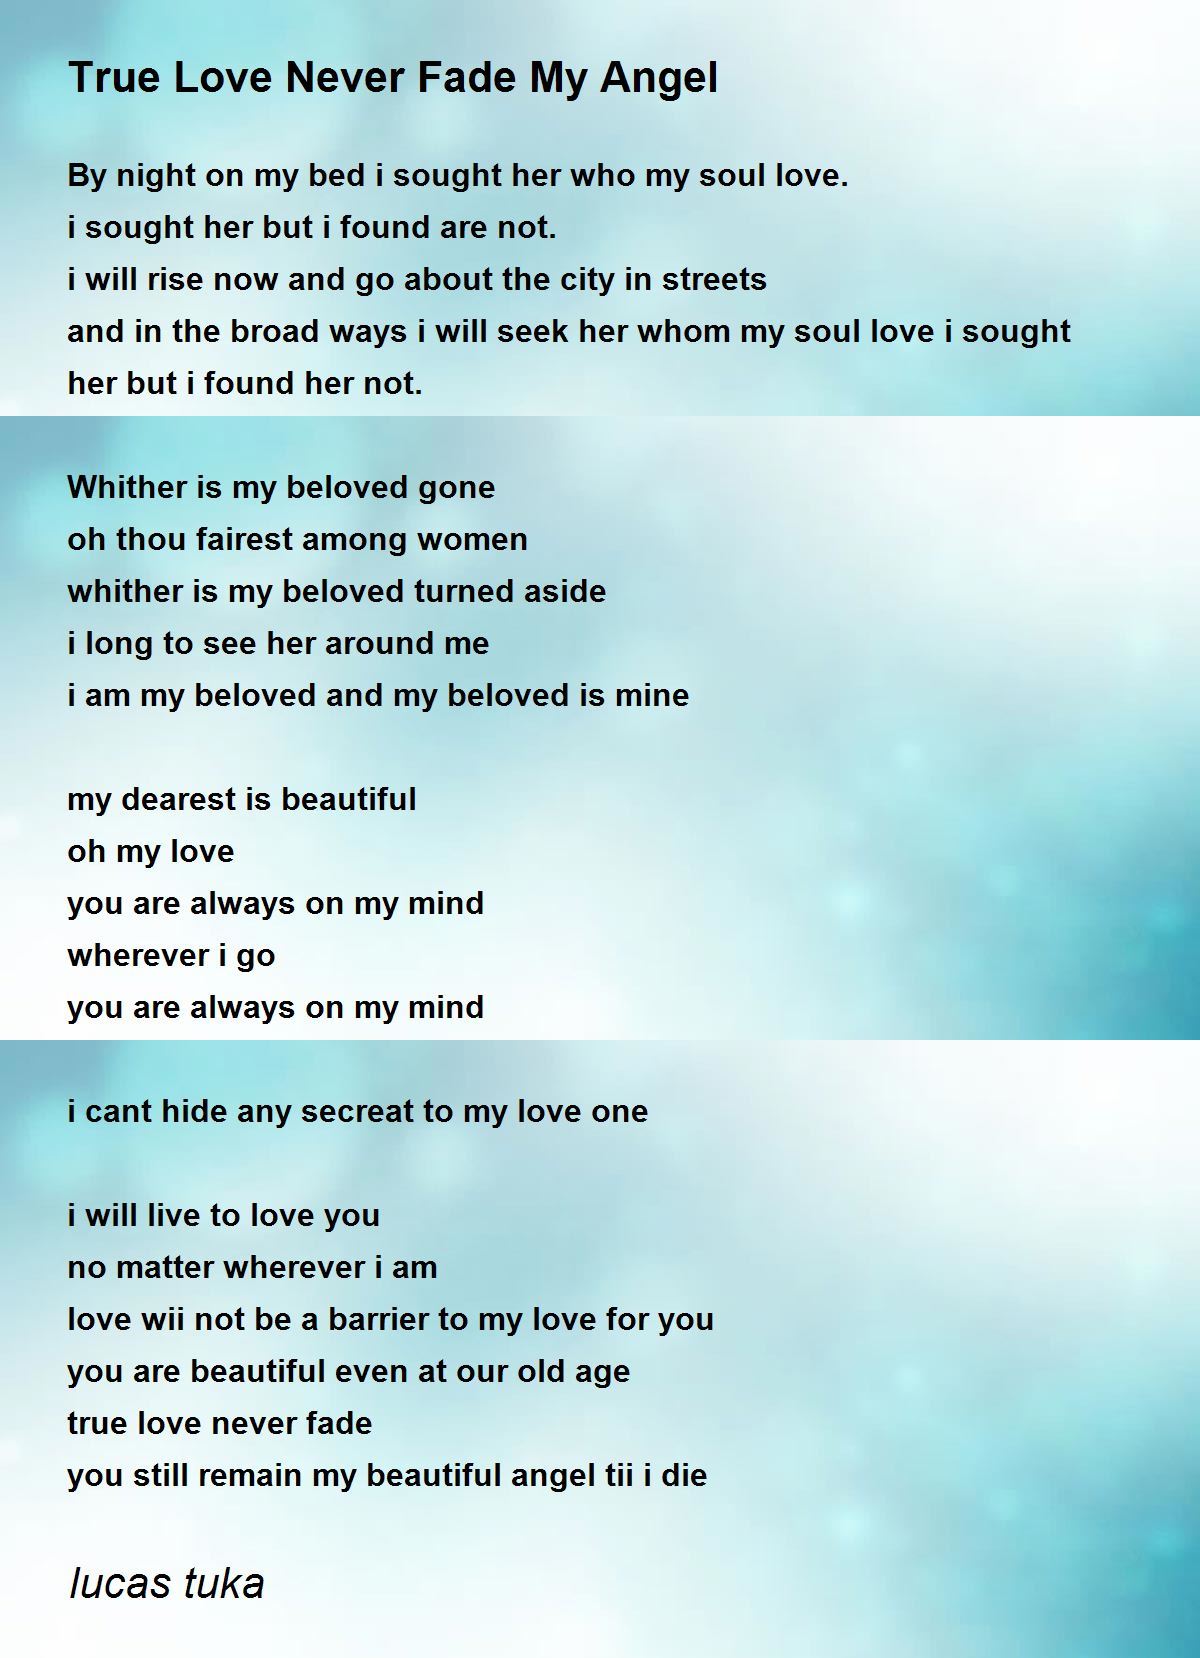 My true love poem for her